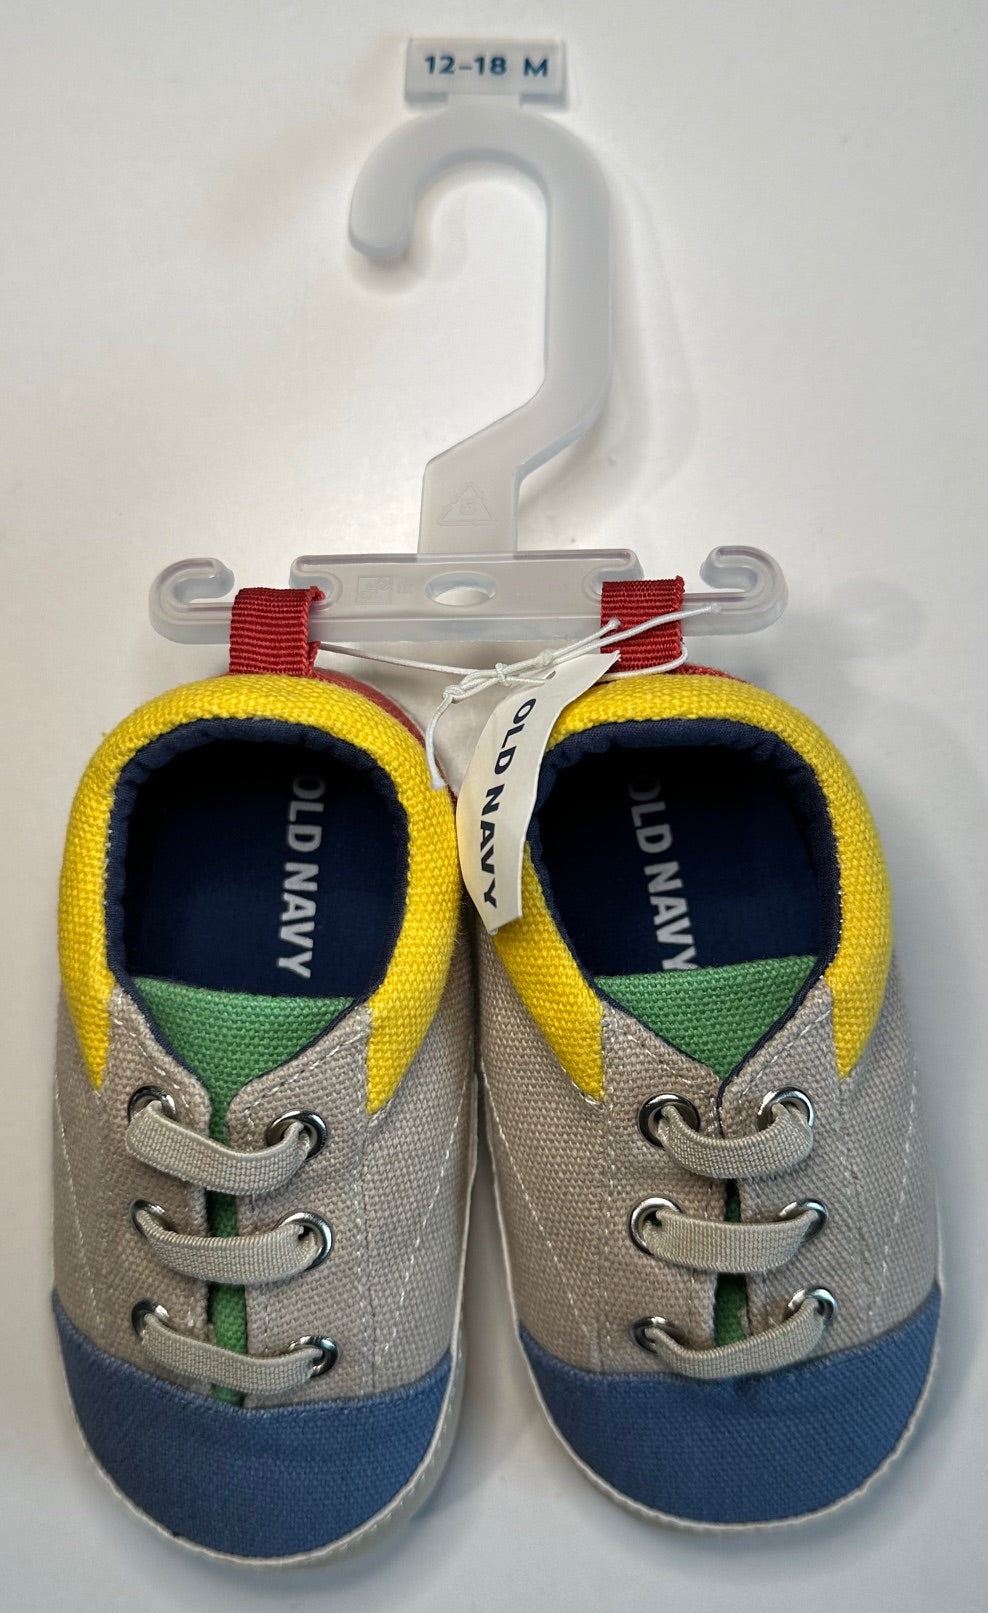 *New* Old Navy, Colourblock Shoes - 12-18 Months